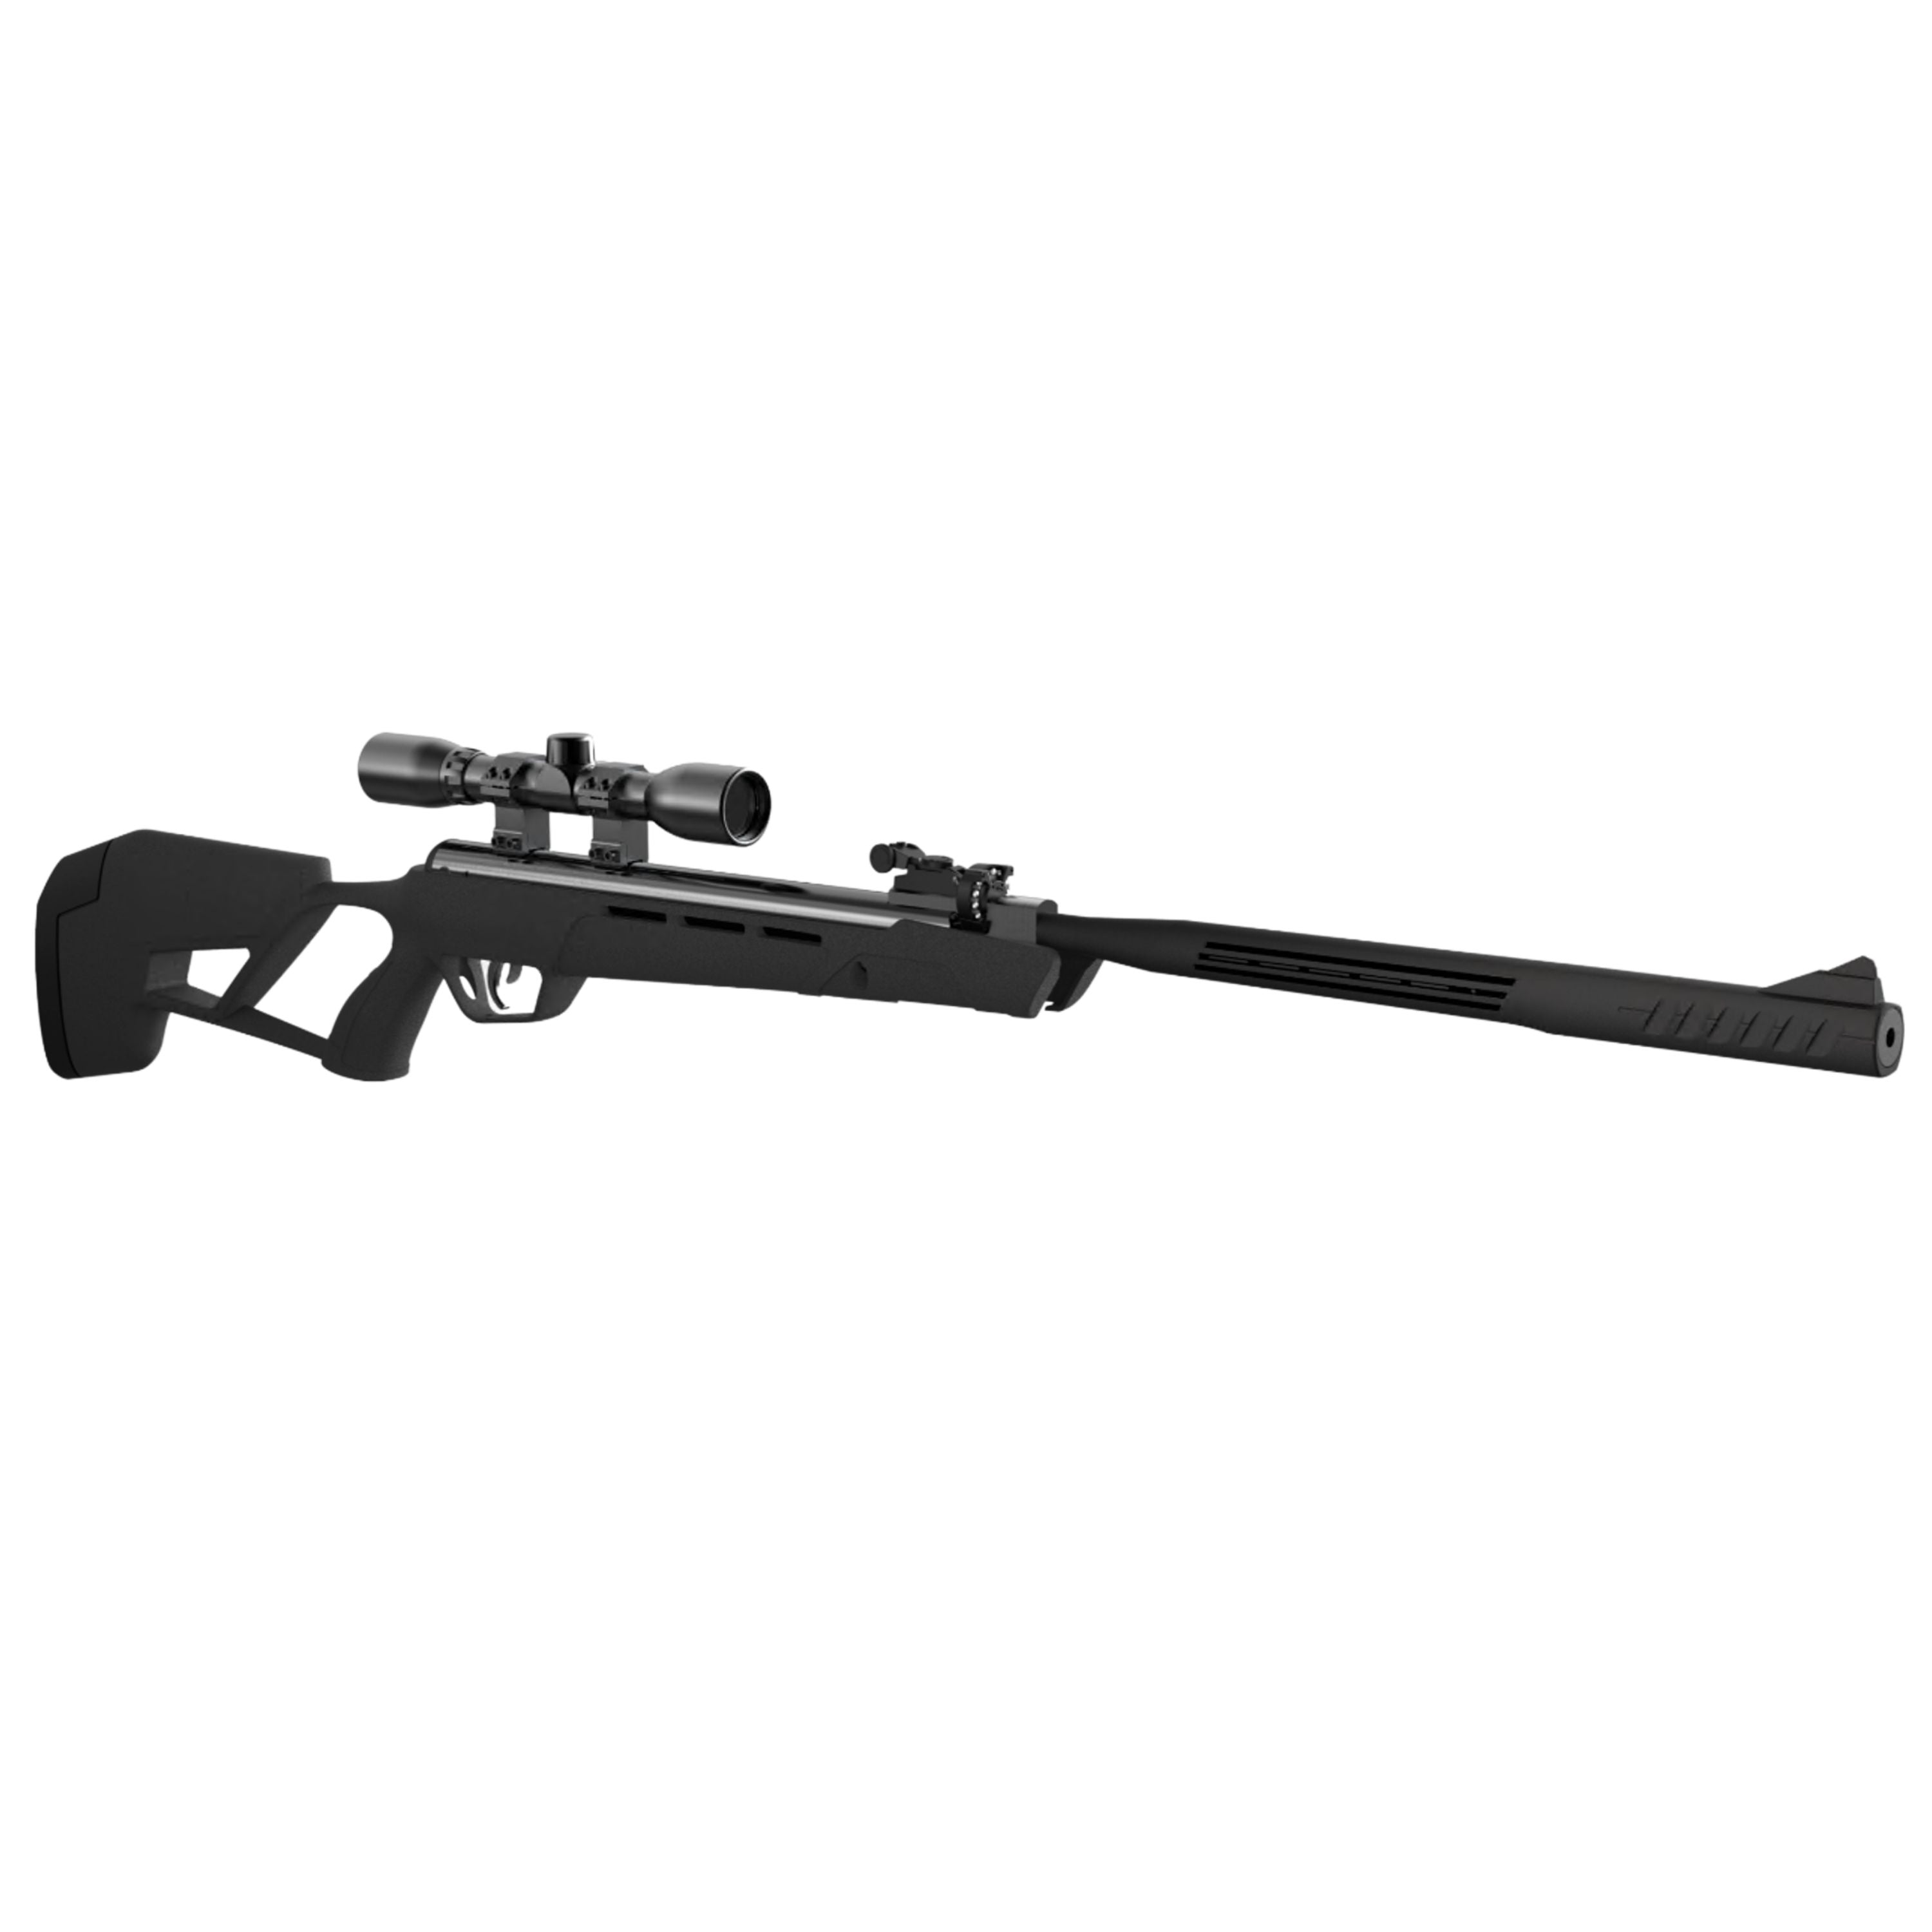 "Mag-Fire Mission" cal .177 air rifle with scope